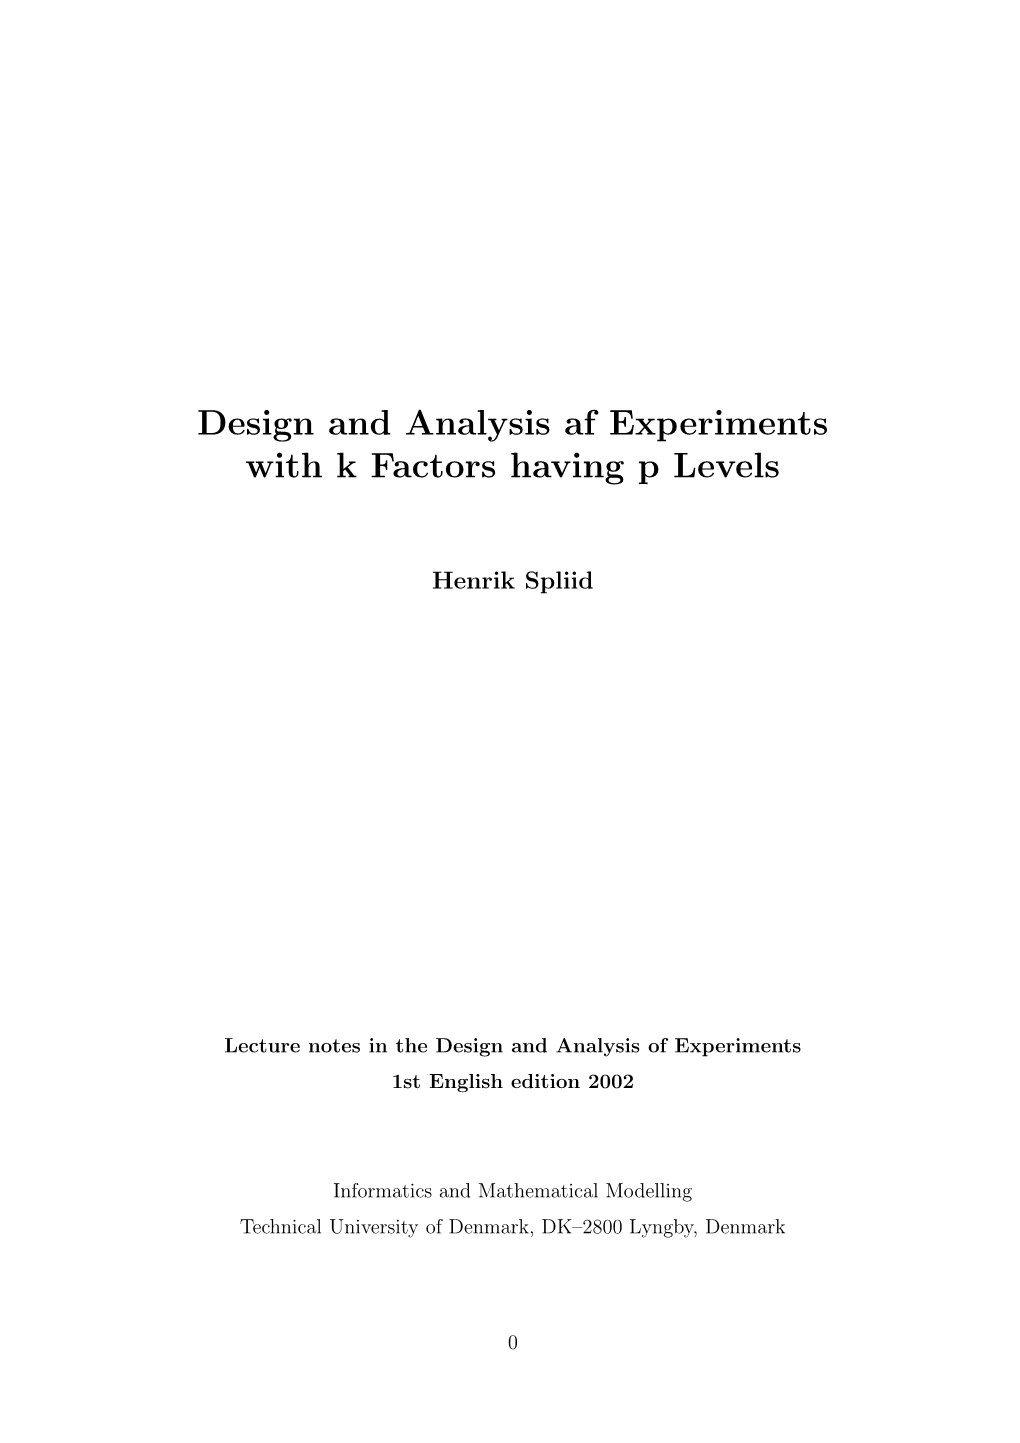 Design and Analysis Af Experiments with K Factors Having P Levels